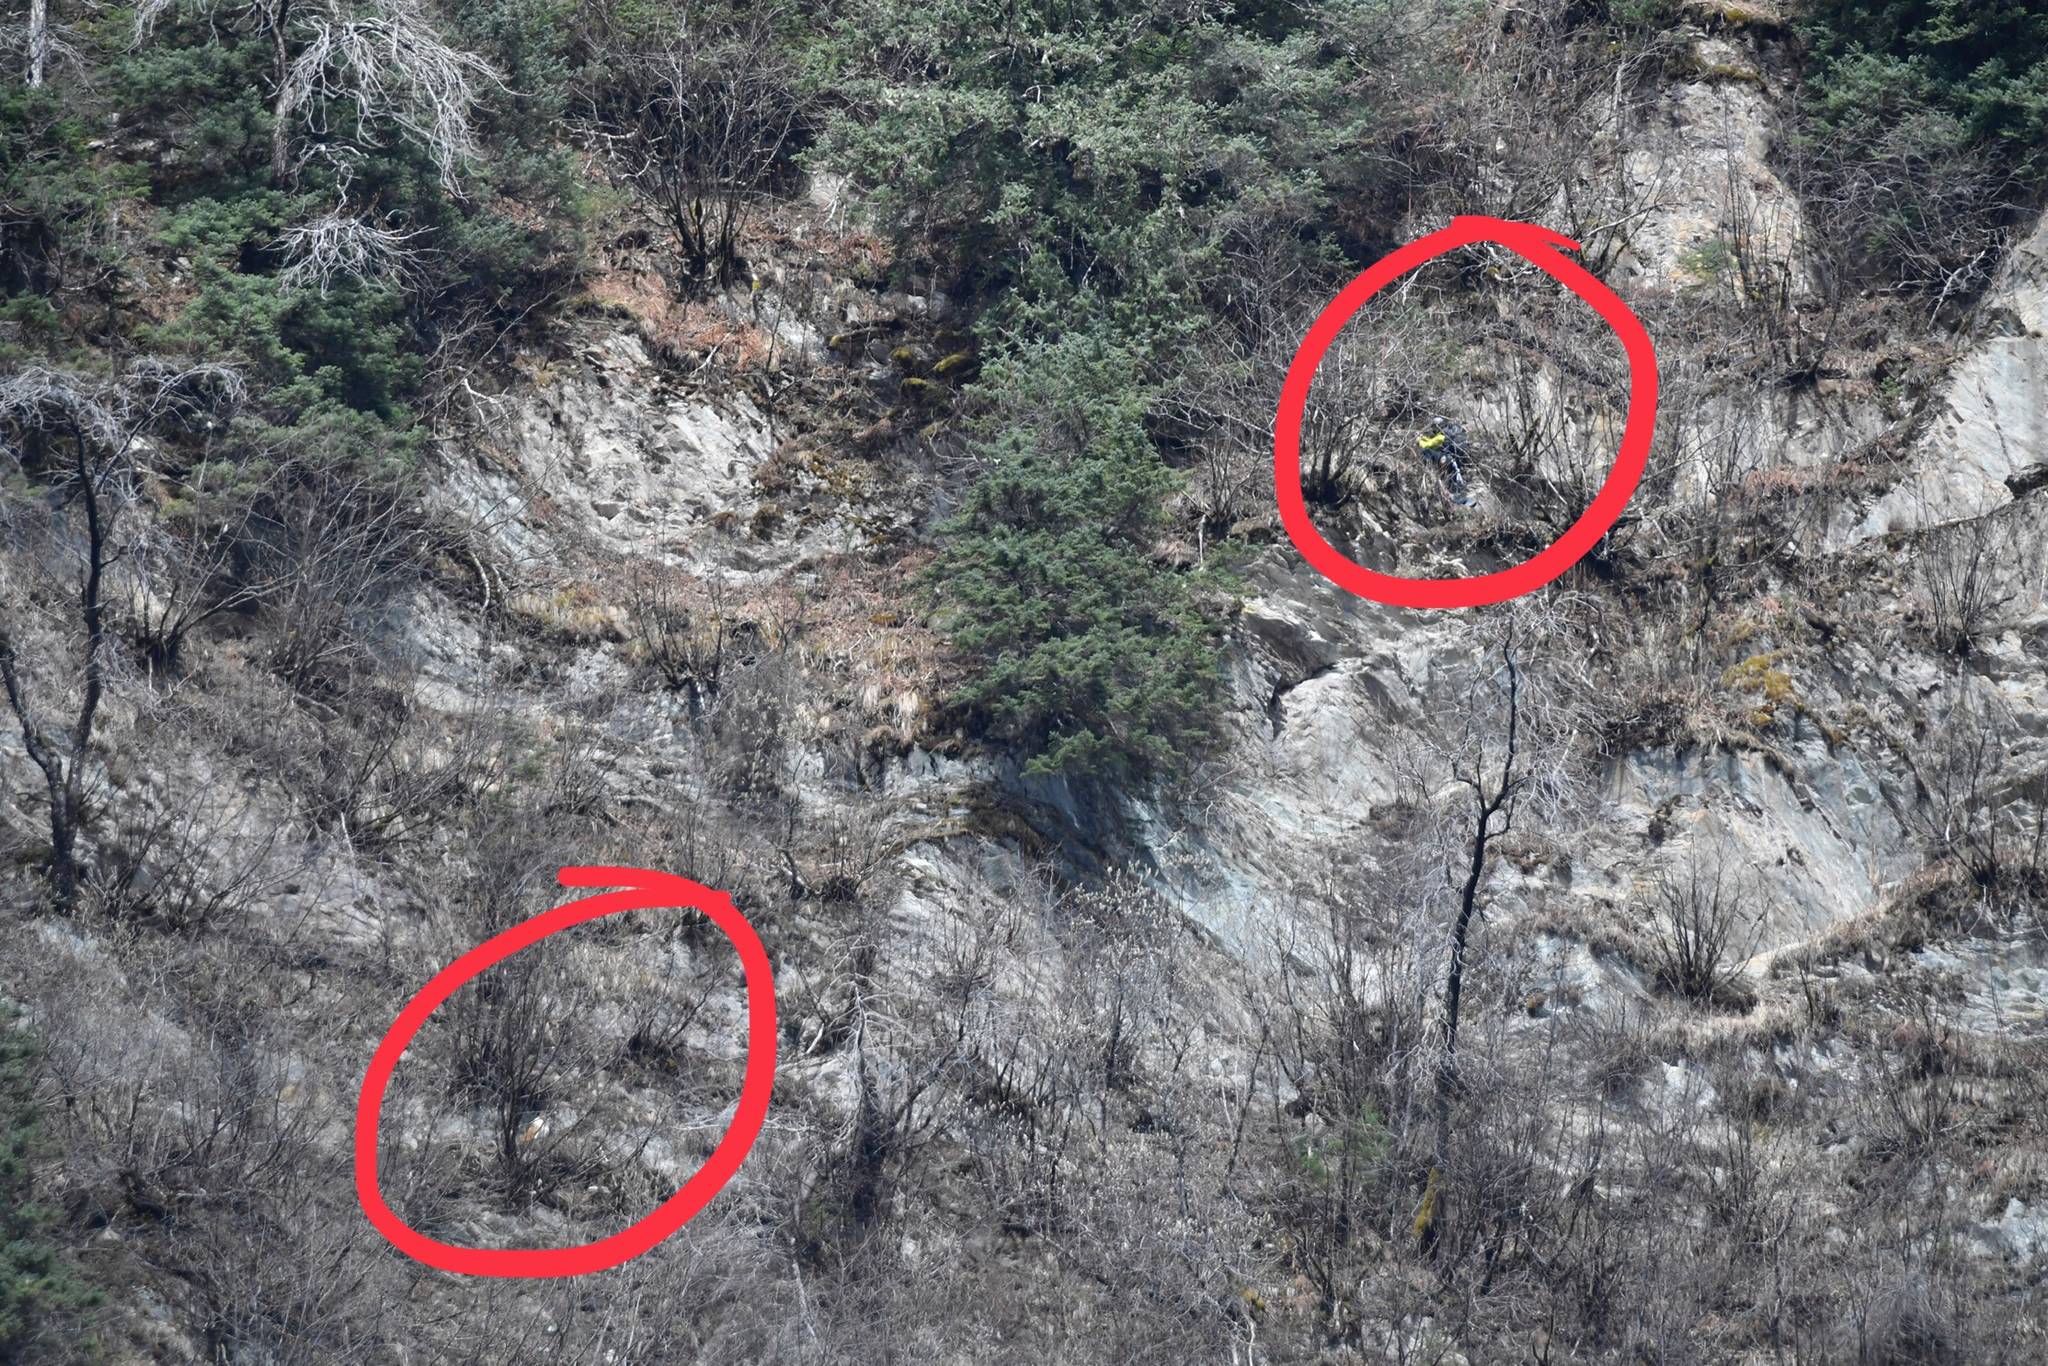 A dog owner is seen trying to get his or her dog, which is stranded on a cliff above the start of the Perseverance Trailhead. He or she reached the dog at about 2:35 p.m. Wednesday. The red circles show the dog owner, top right, and the dog, bottom left. (Michael Penn | Juneau Empire)